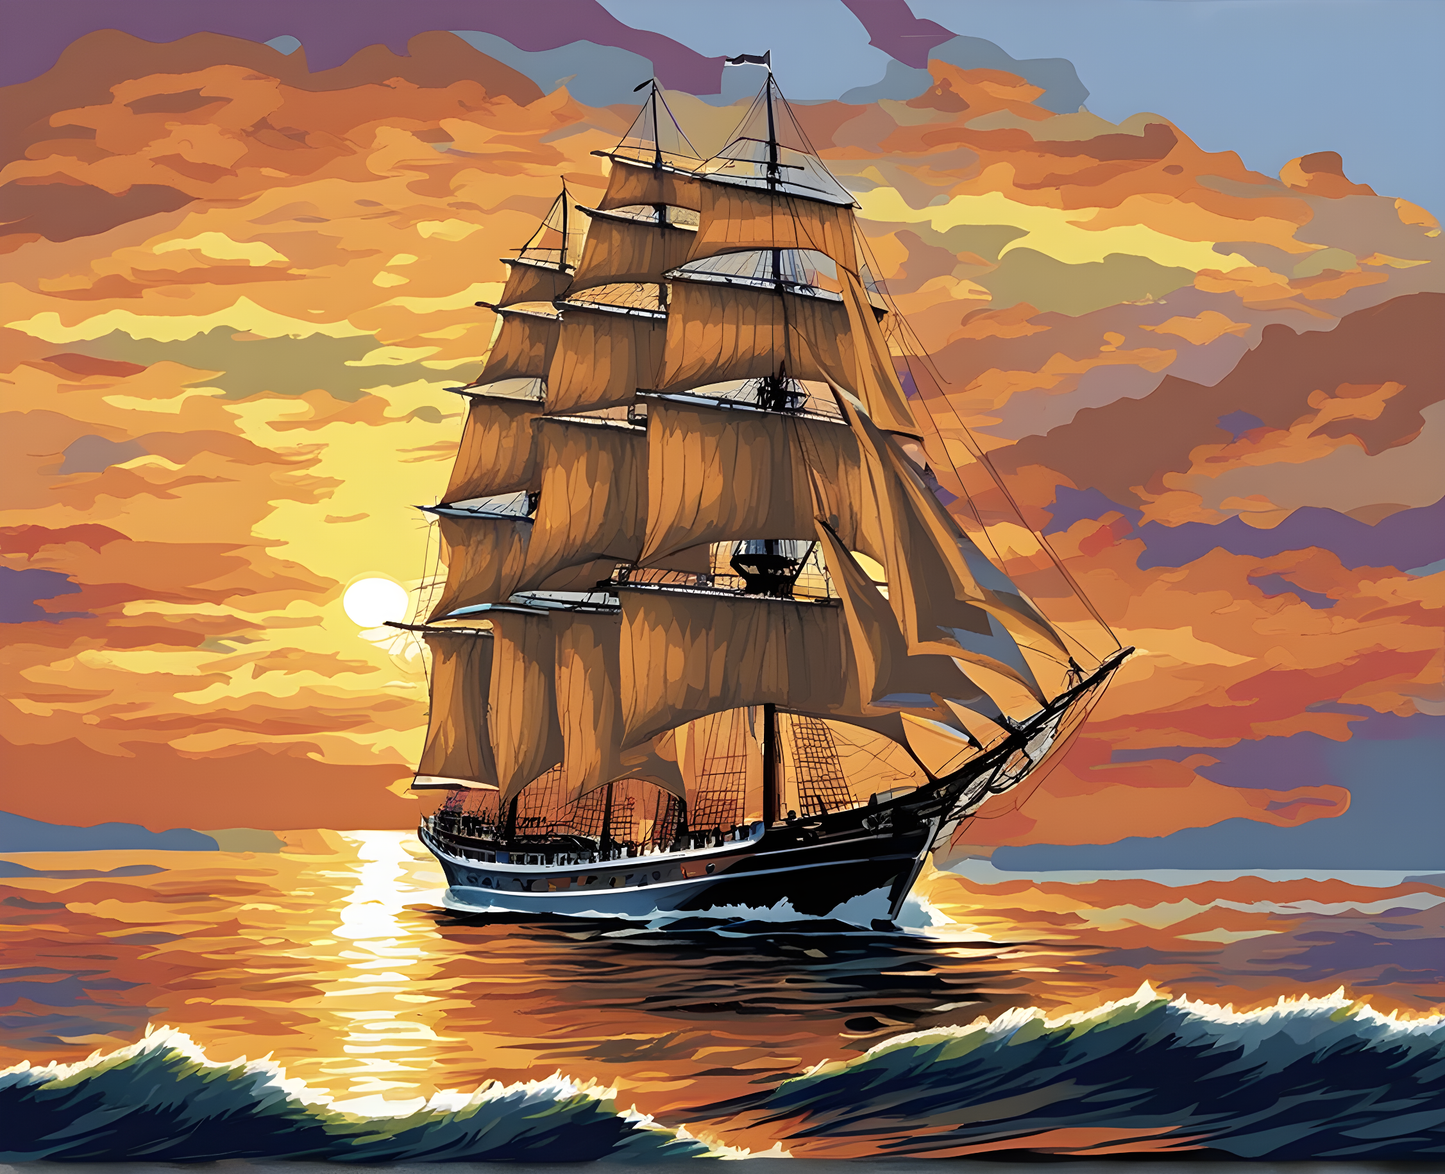 Tall Sailing Ship at Sunrise - Van-Go Paint-By-Number Kit